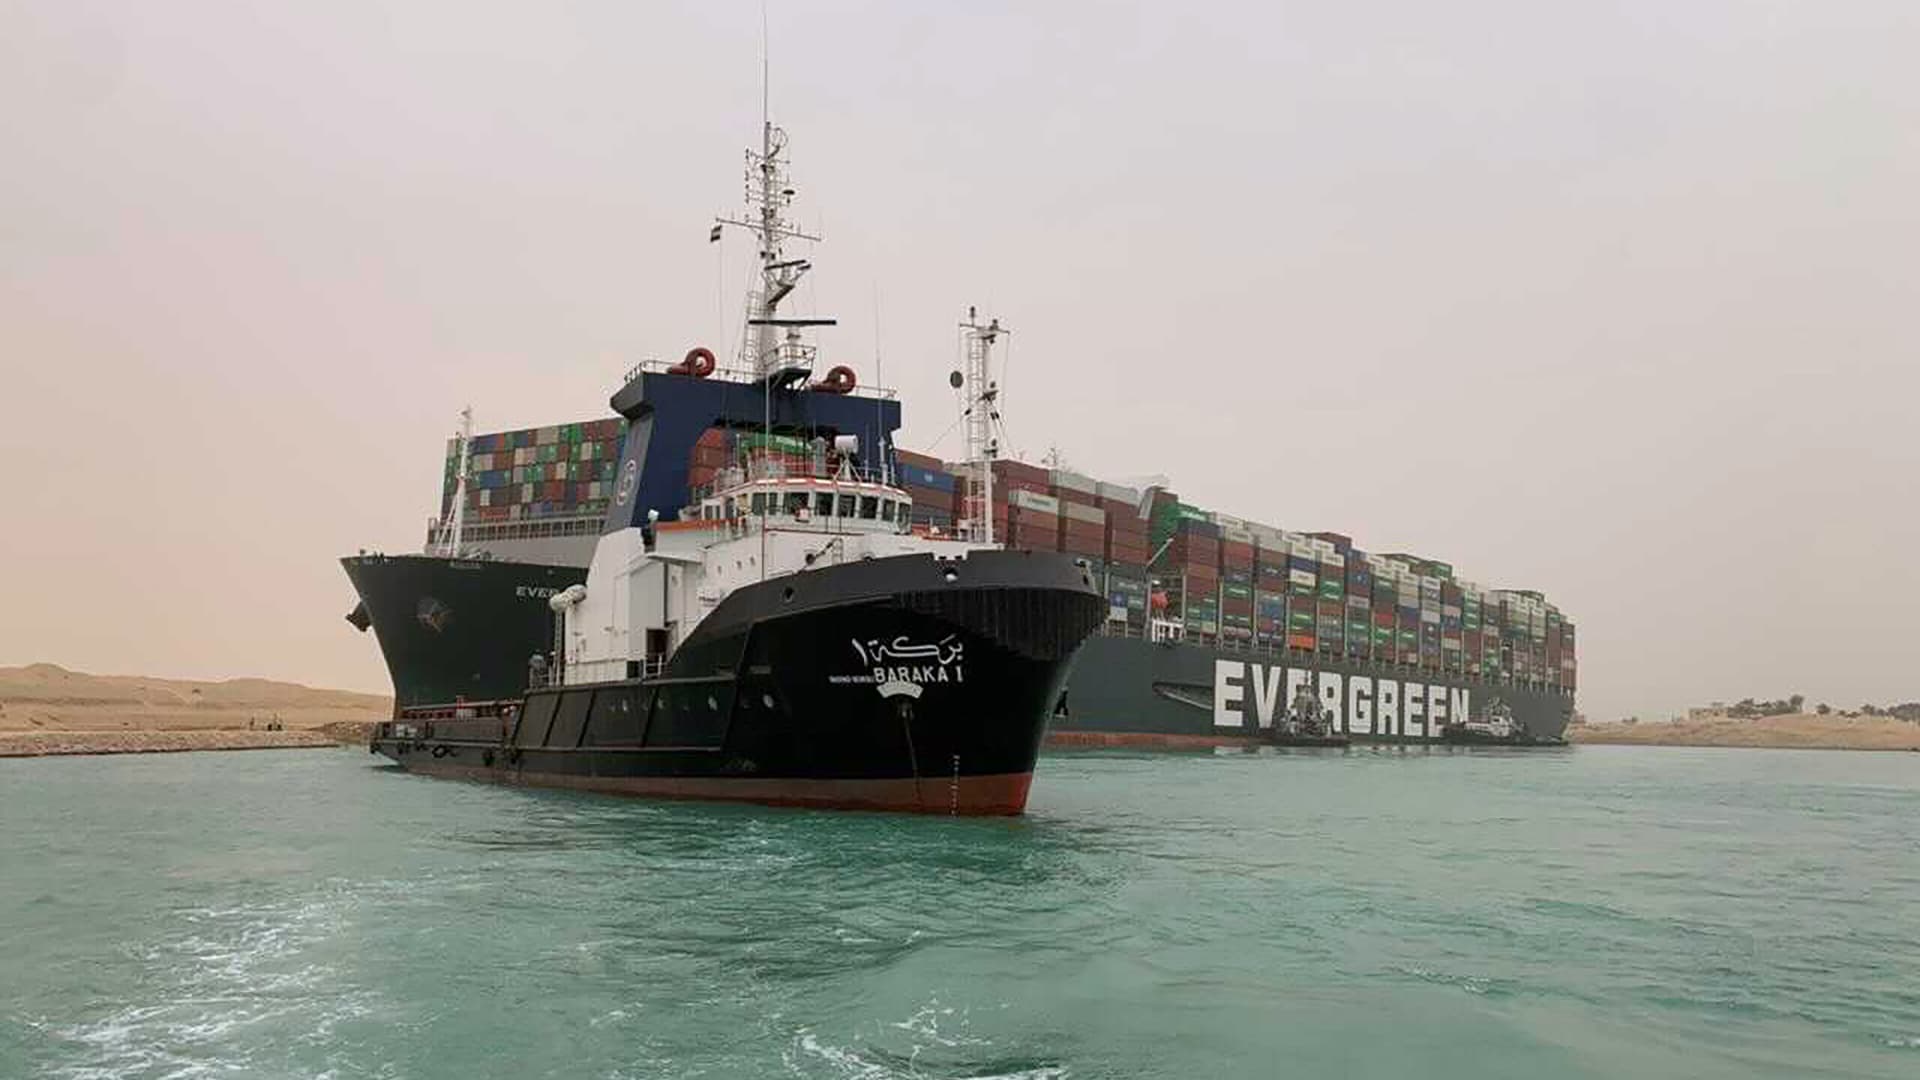 In this photo released by the Suez Canal Authority, a boat navigates in front of a massive cargo ship, named the Ever Given, rear, sits grounded Wednesday, March 24, 2021, after it turned sideways in Egypt's Suez Canal, blocking traffic in a crucial East-West waterway for global shipping.